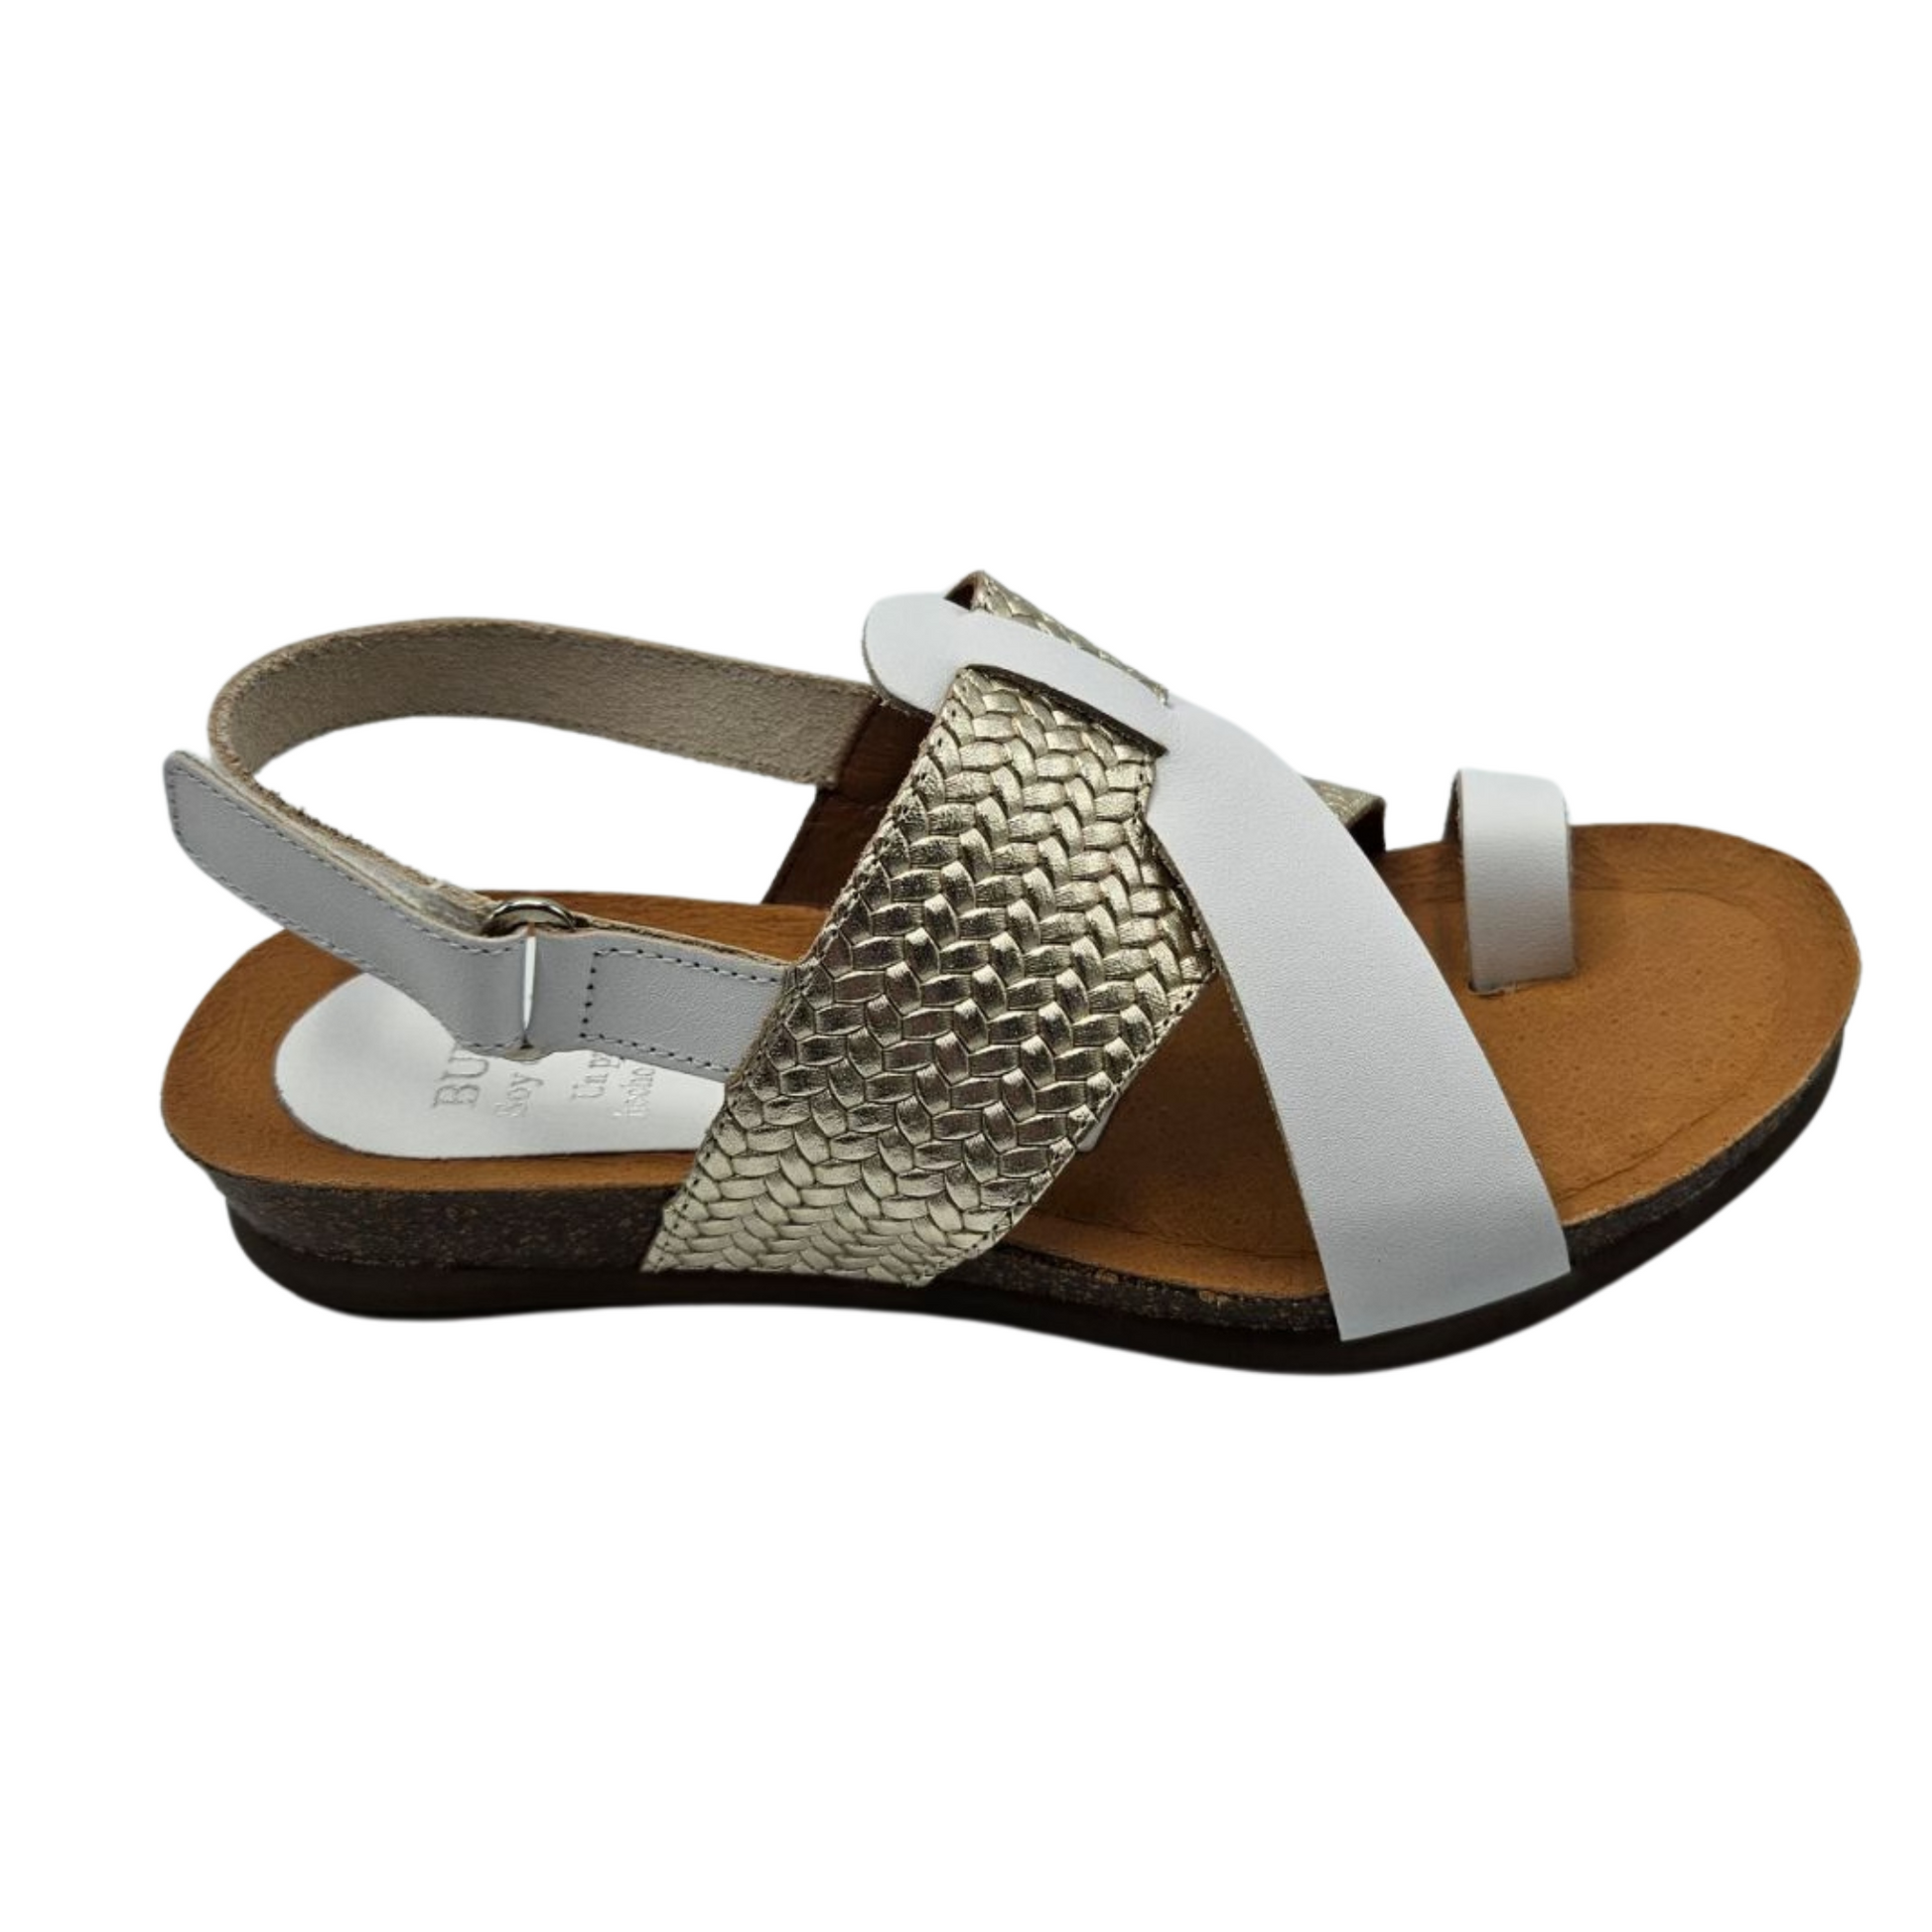 Right facing view of white and gold leather sandal with a toe strap and velcro ankle strap. Braided detail on the gold strap and cushioned footbed